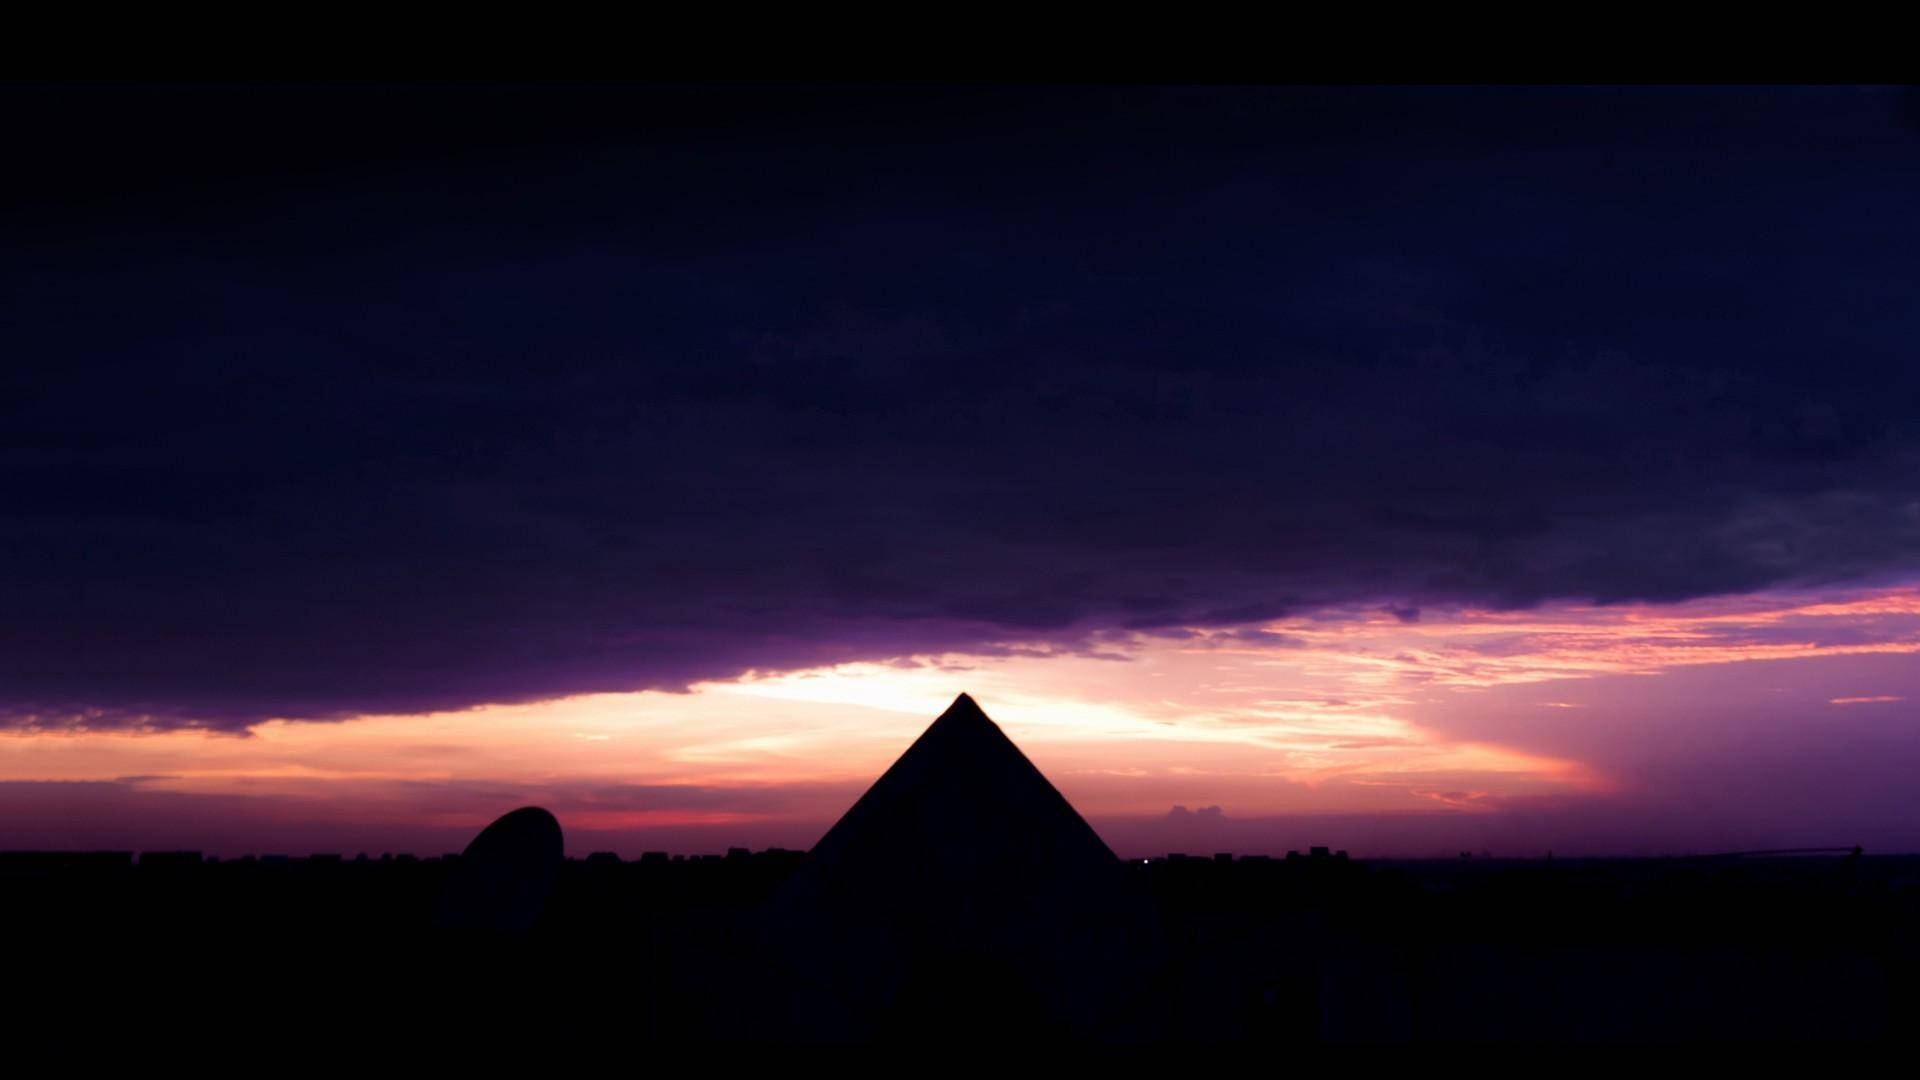 Black Pyramid With Colorful Sky